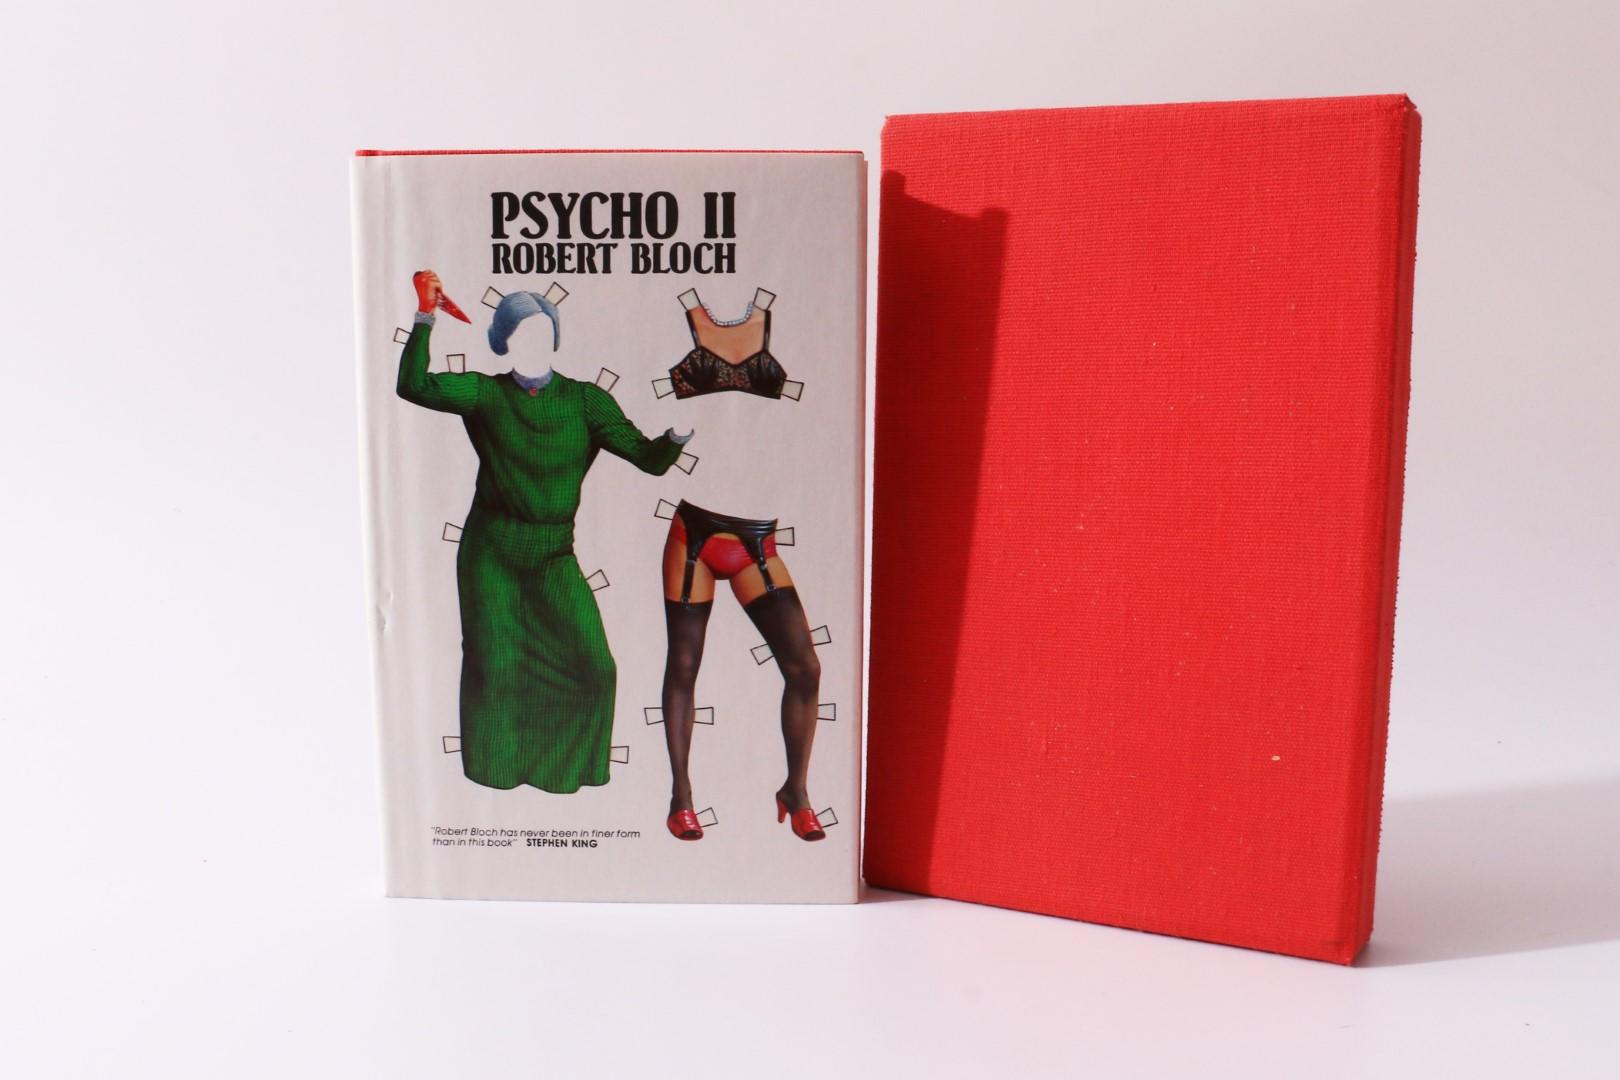 Robert Bloch - Psycho II - Whispers Press, 1982, Signed Limited Edition.